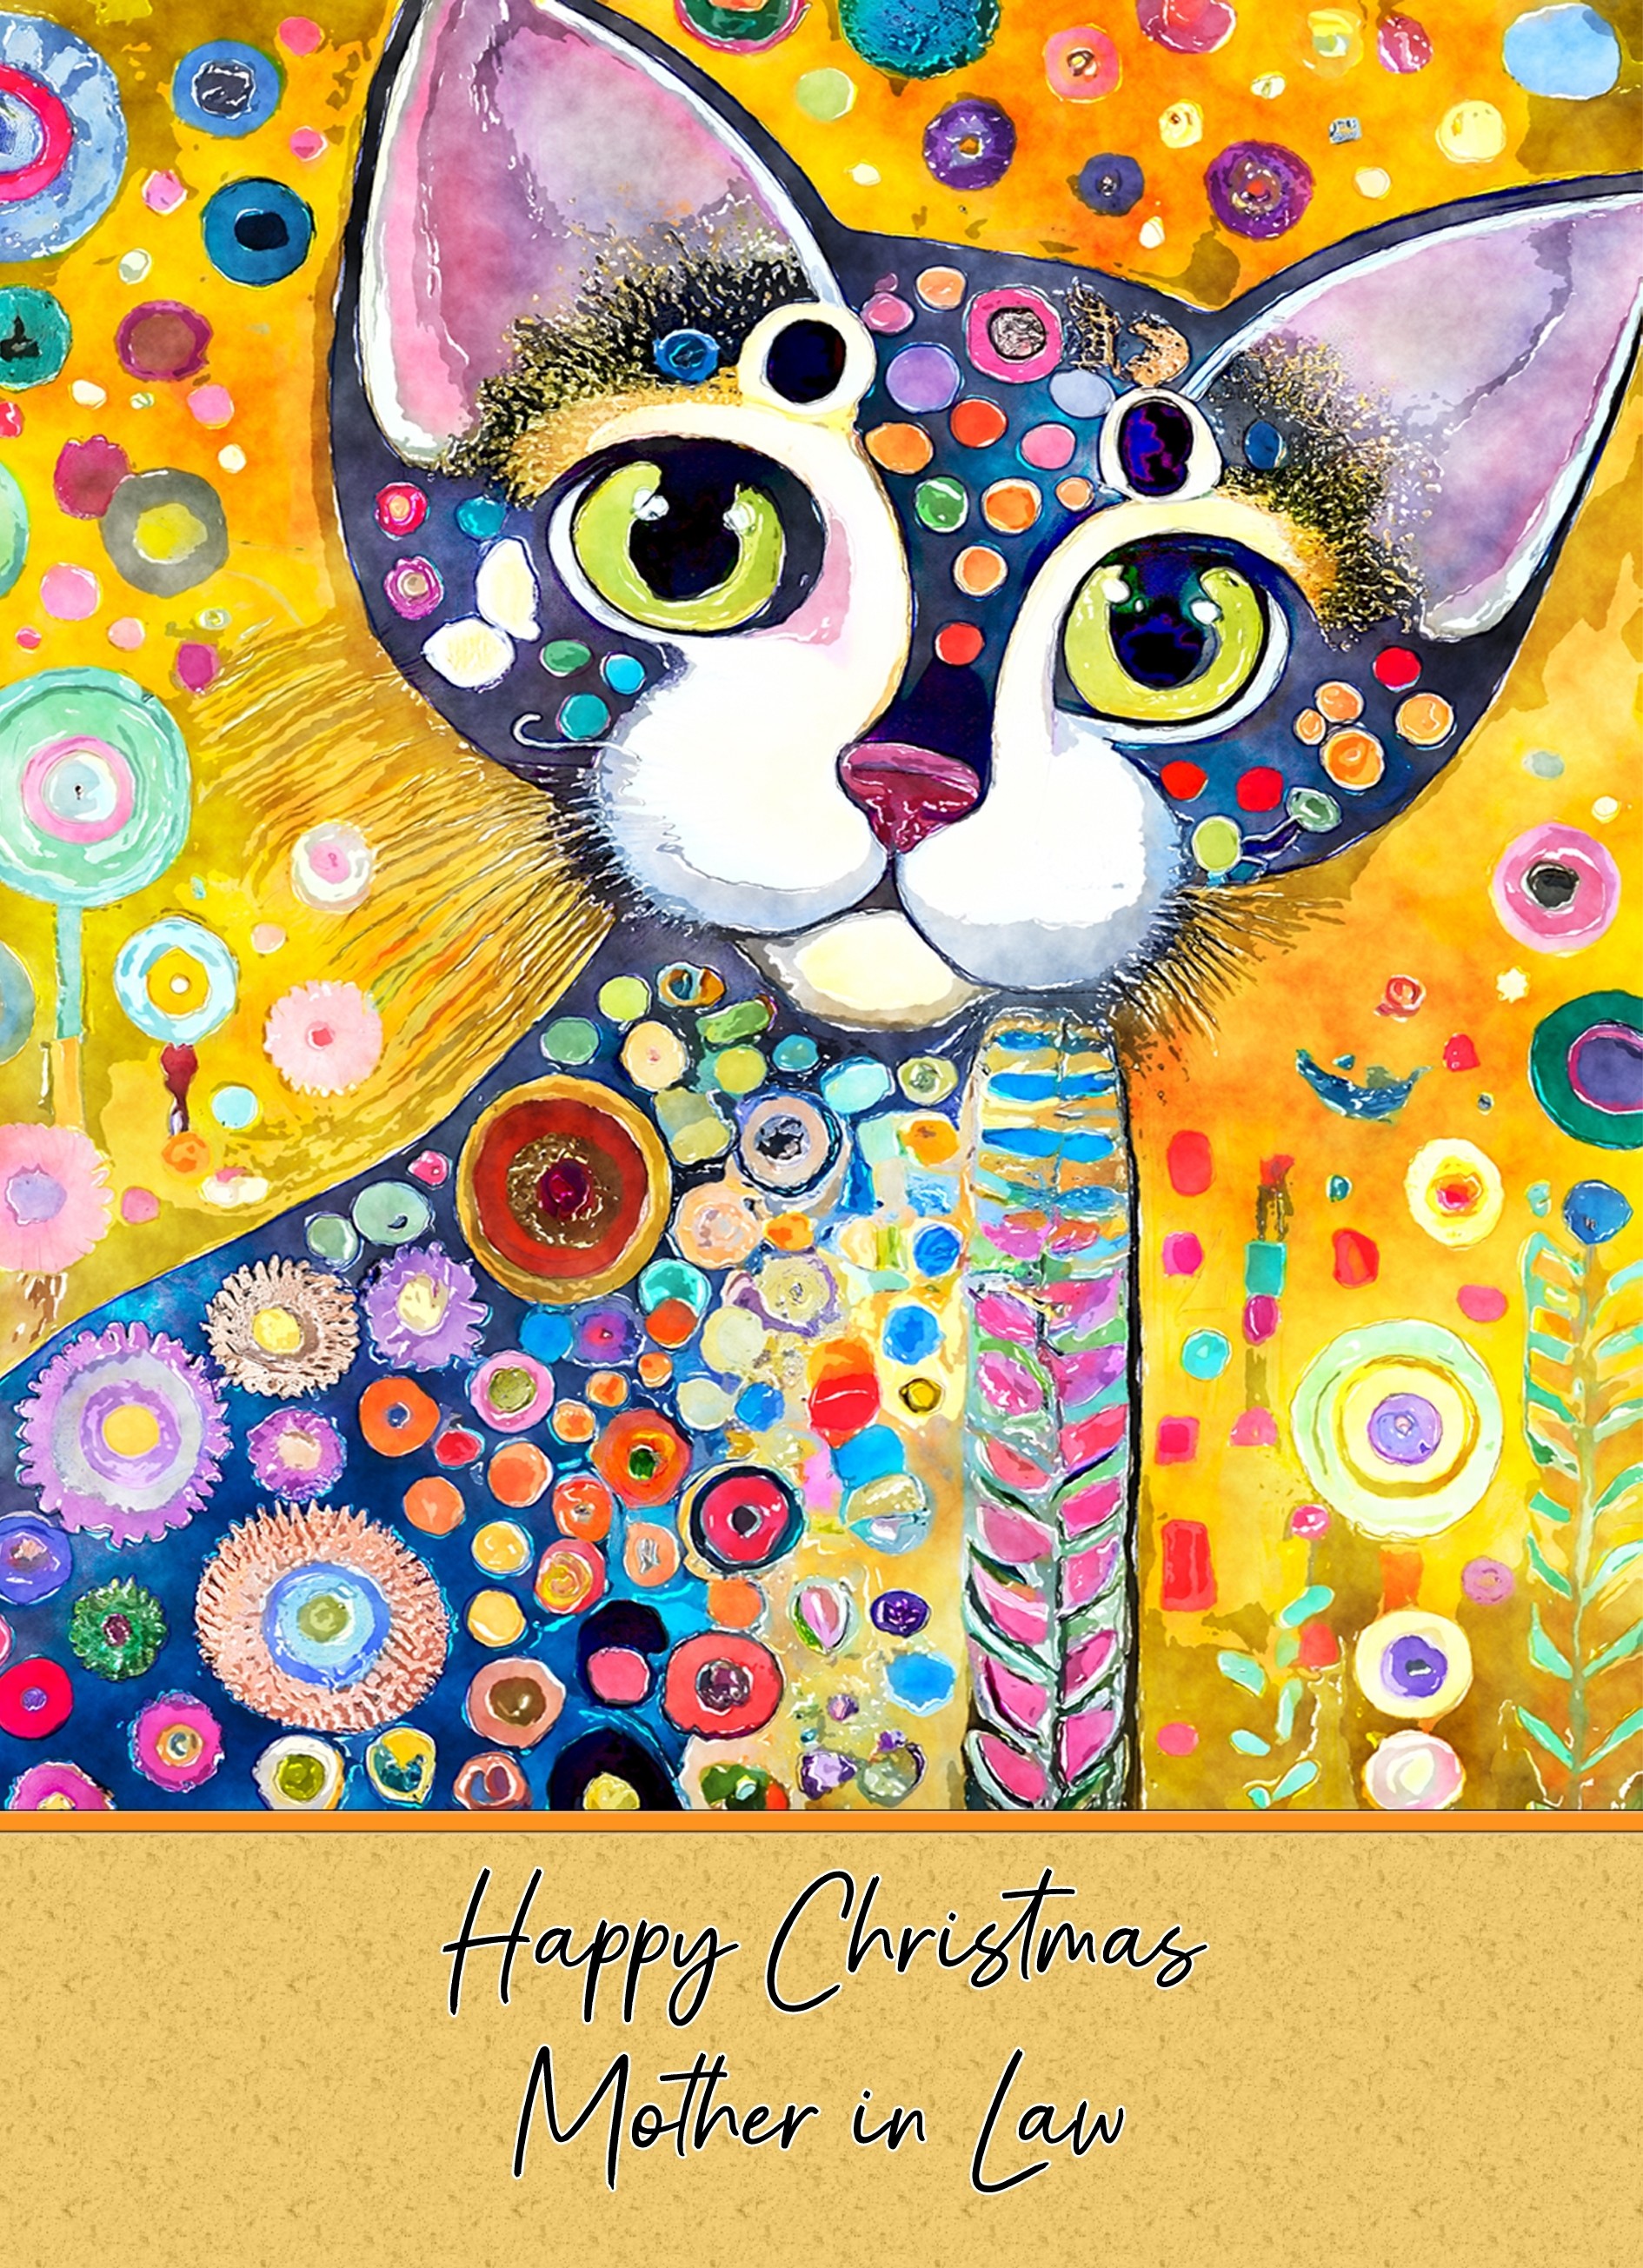 Christmas Card For Mother in Law (Cat Art Painting, Design 2)